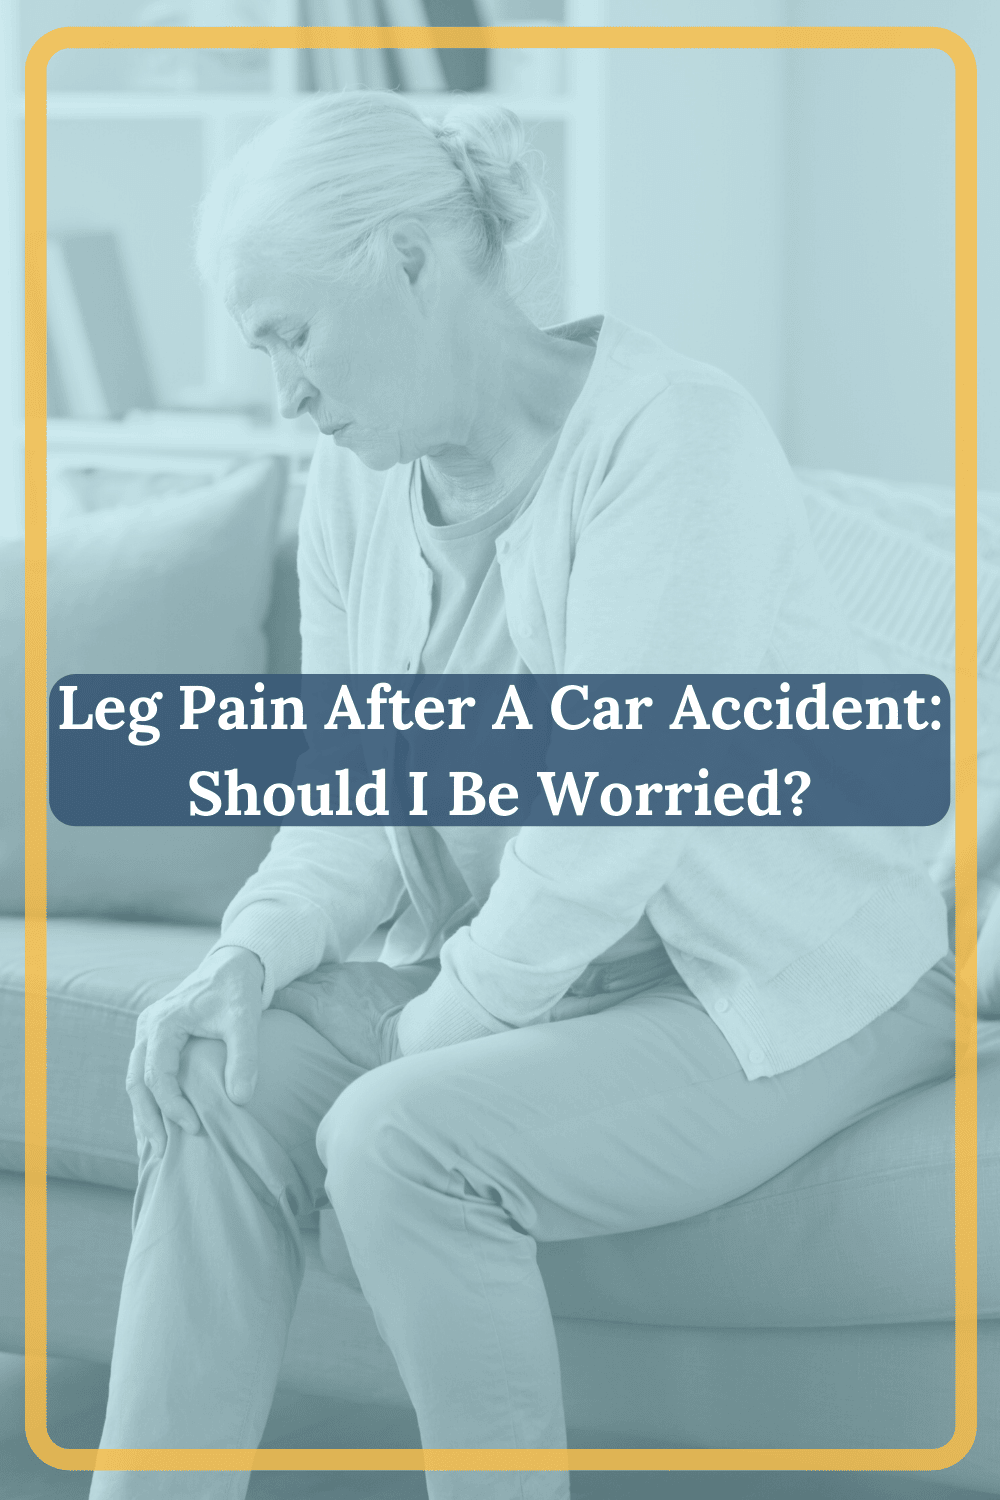 Leg Pain After Car Accident: Should I Be Worried?